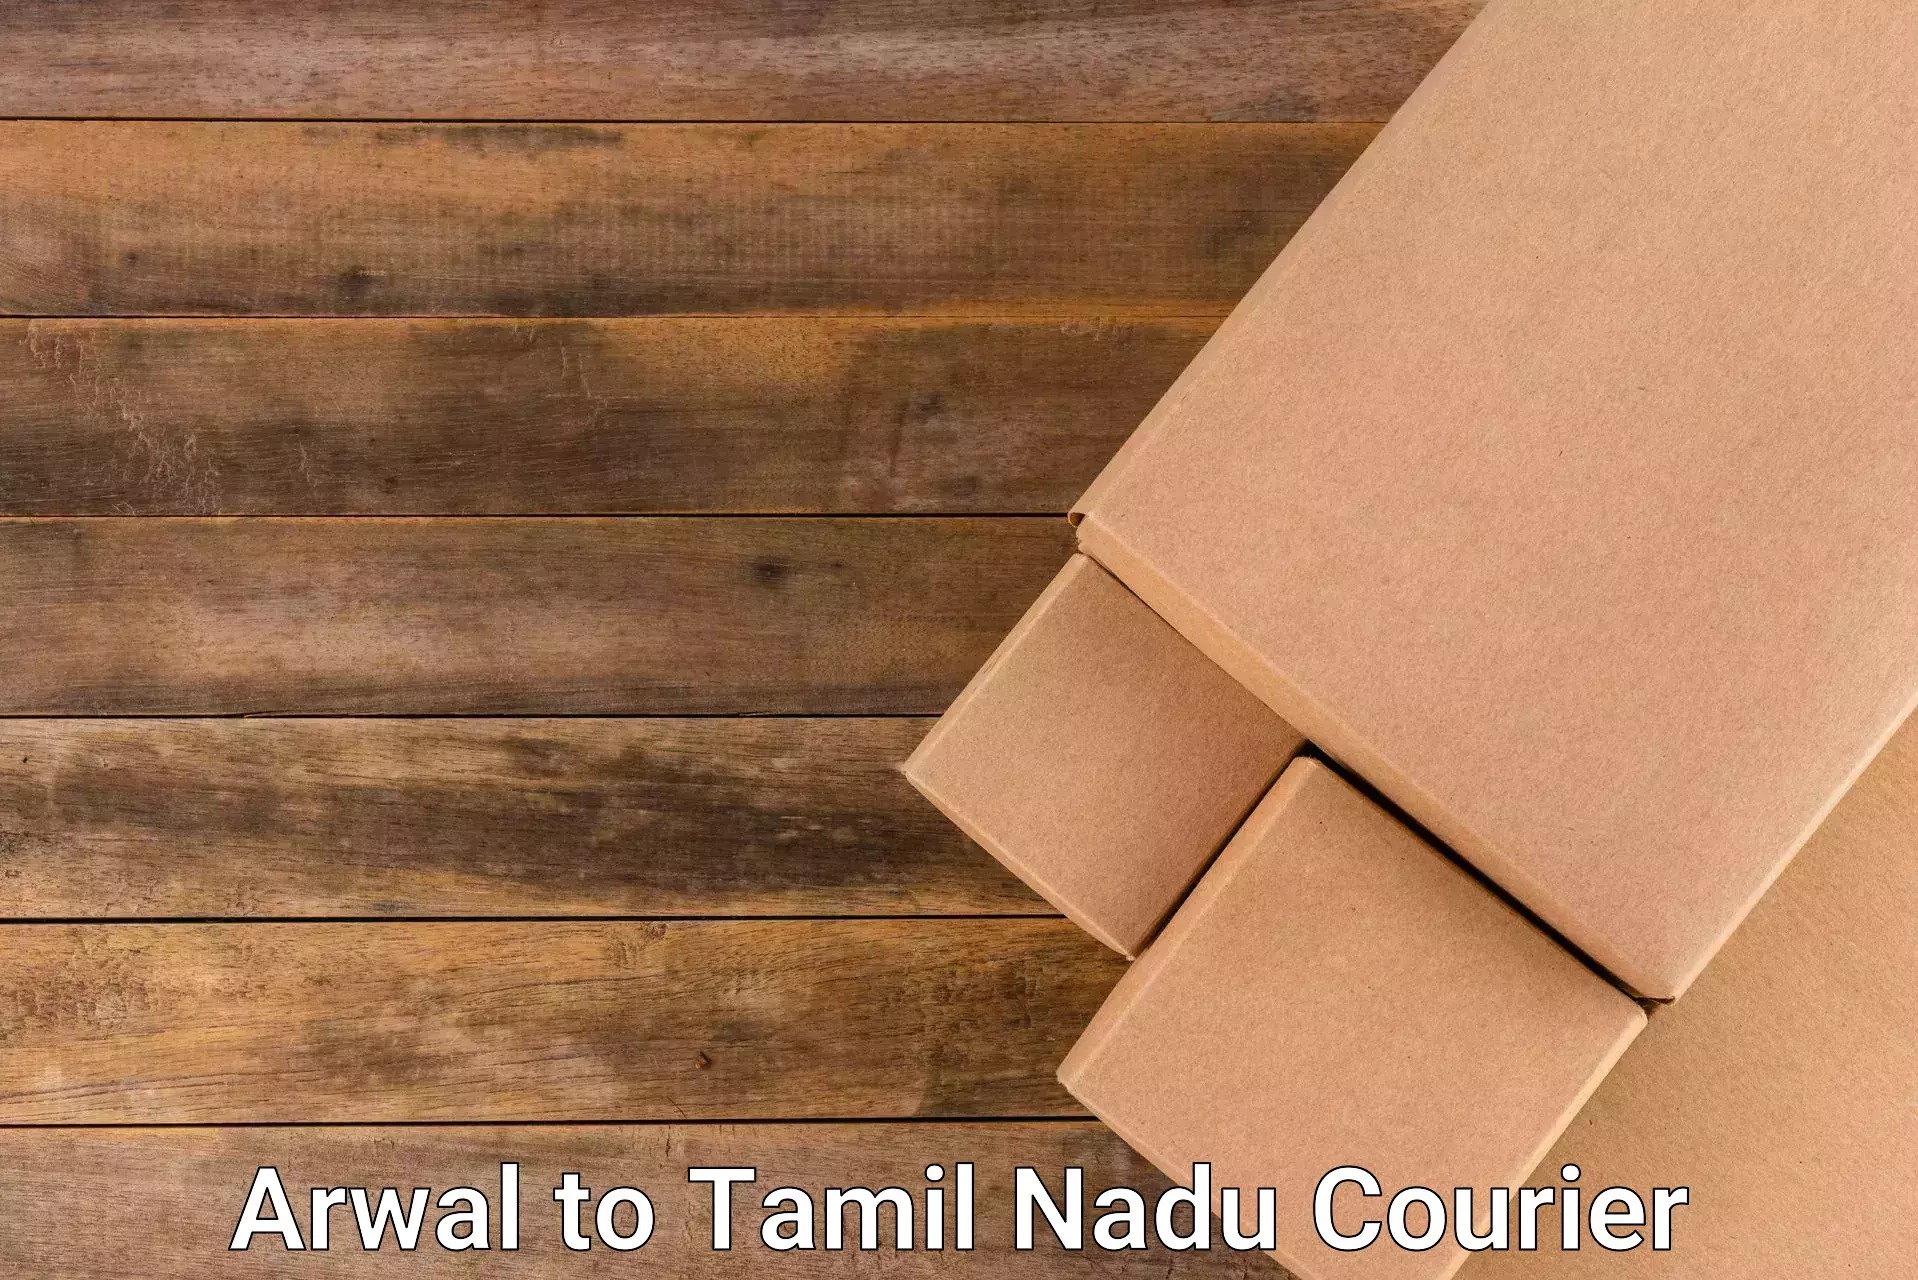 Package delivery network Arwal to Tiruppur